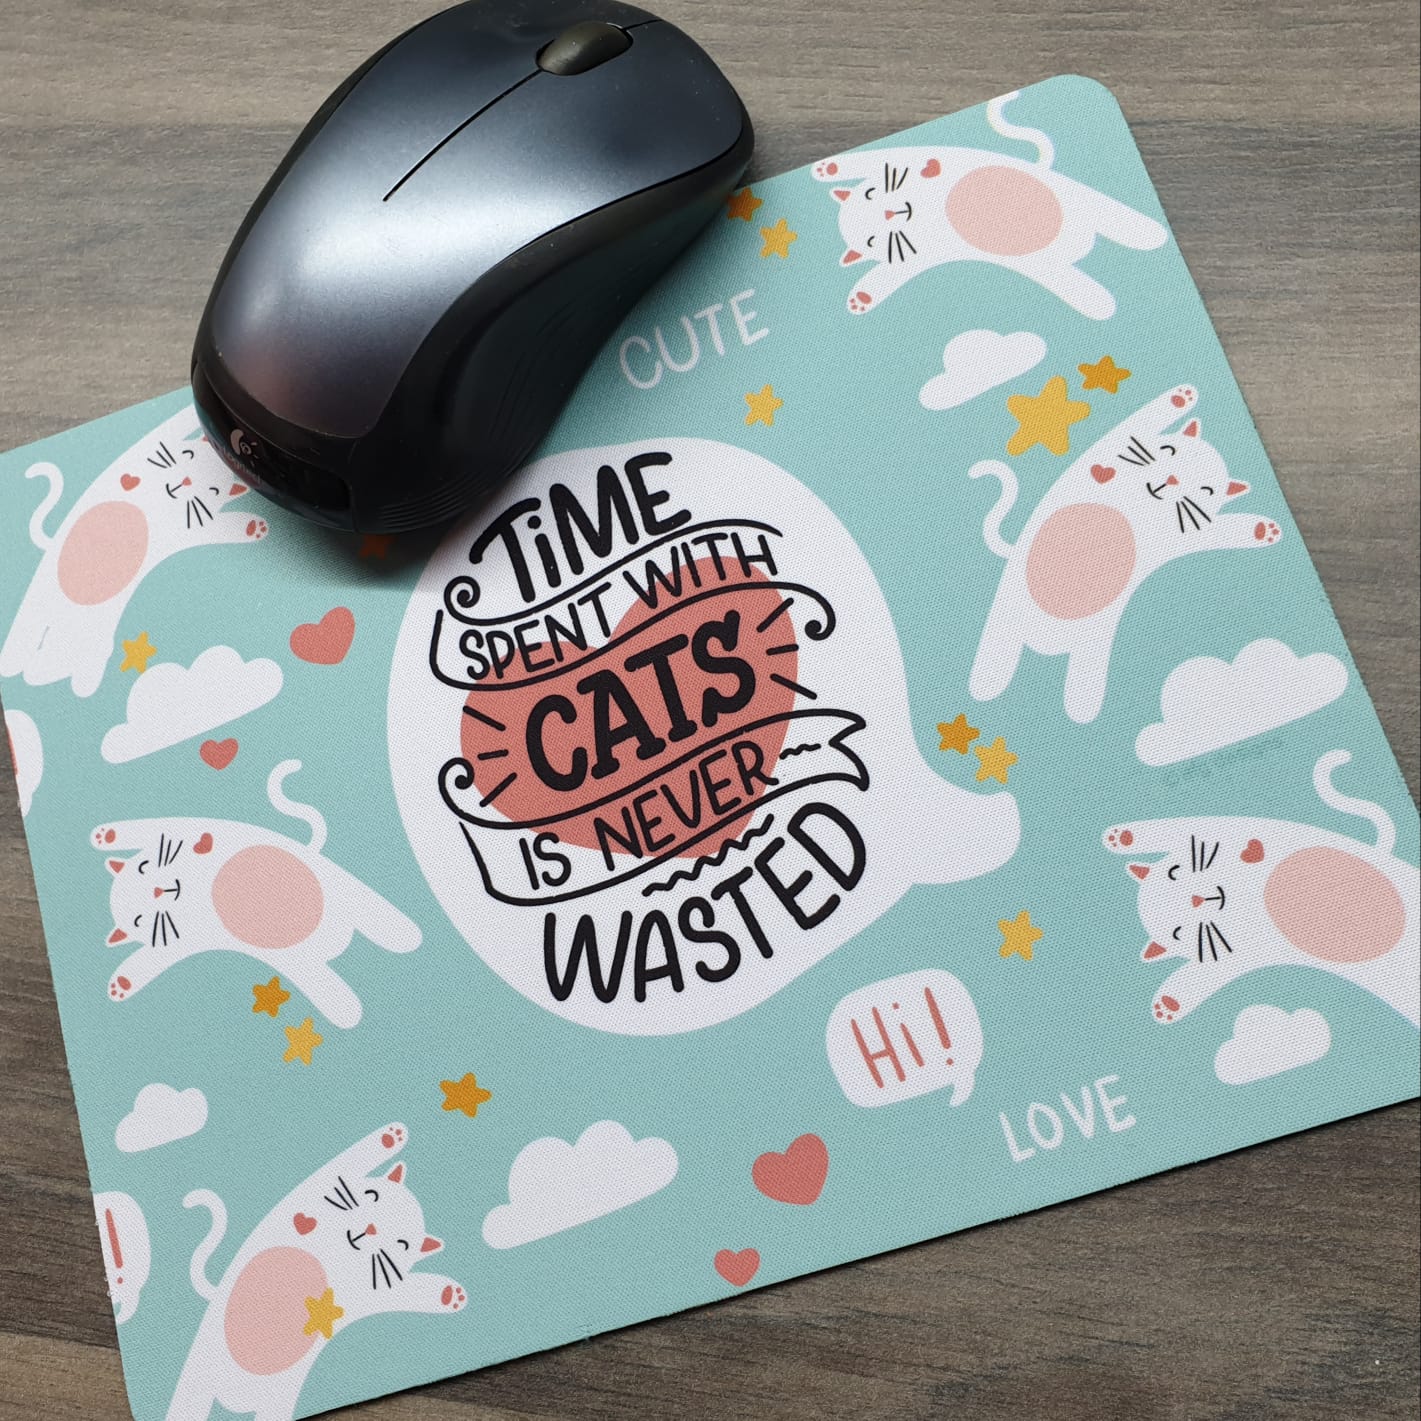 Mousepad - Time spent with cats is never wasted